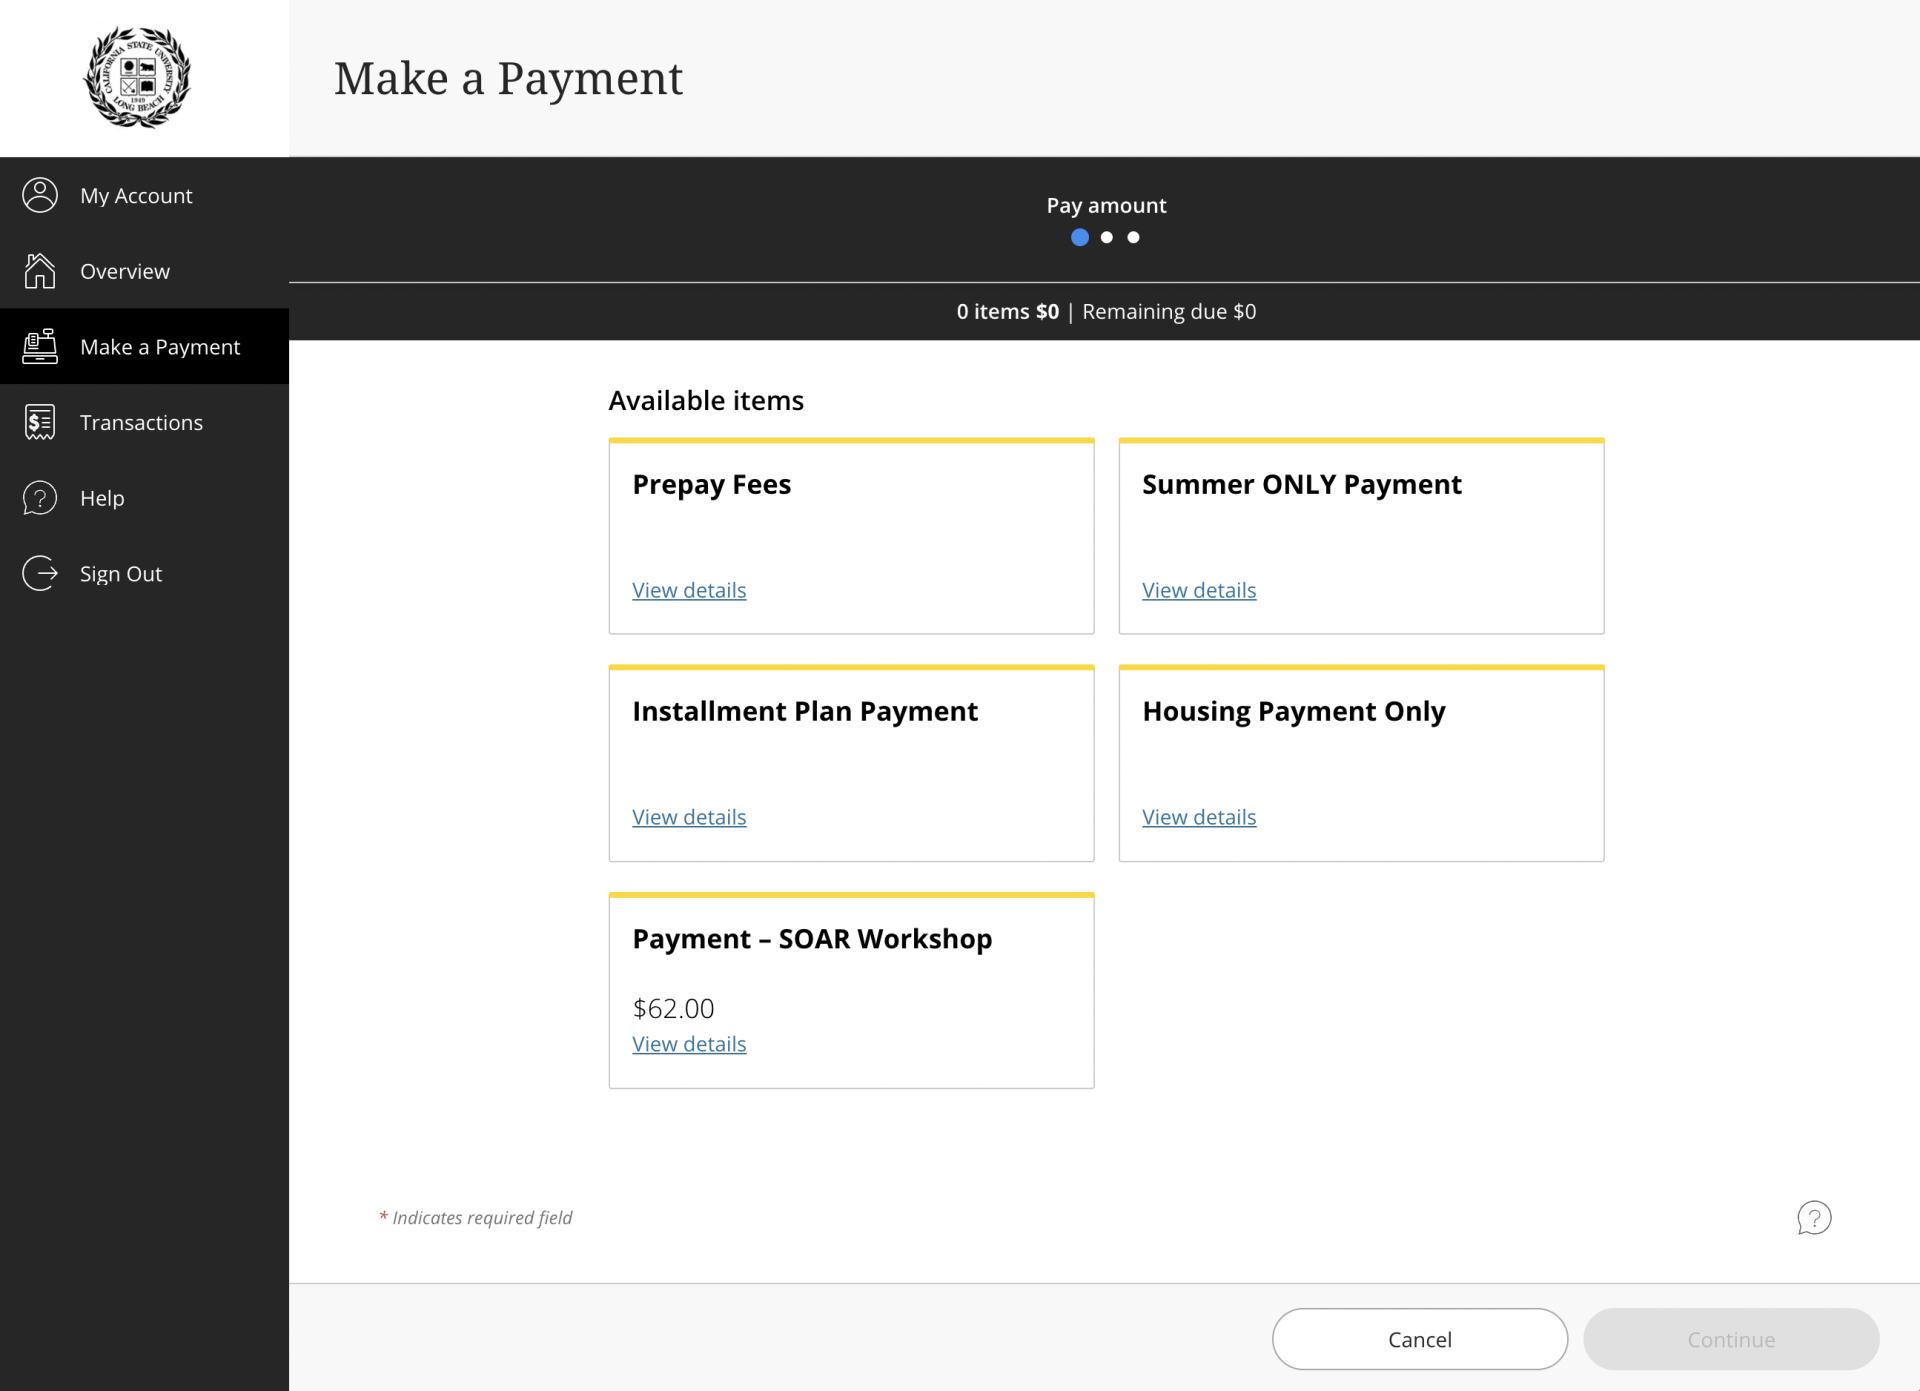 Screenshot of Make a Payment page with "Payment - SOAR Workshop" option